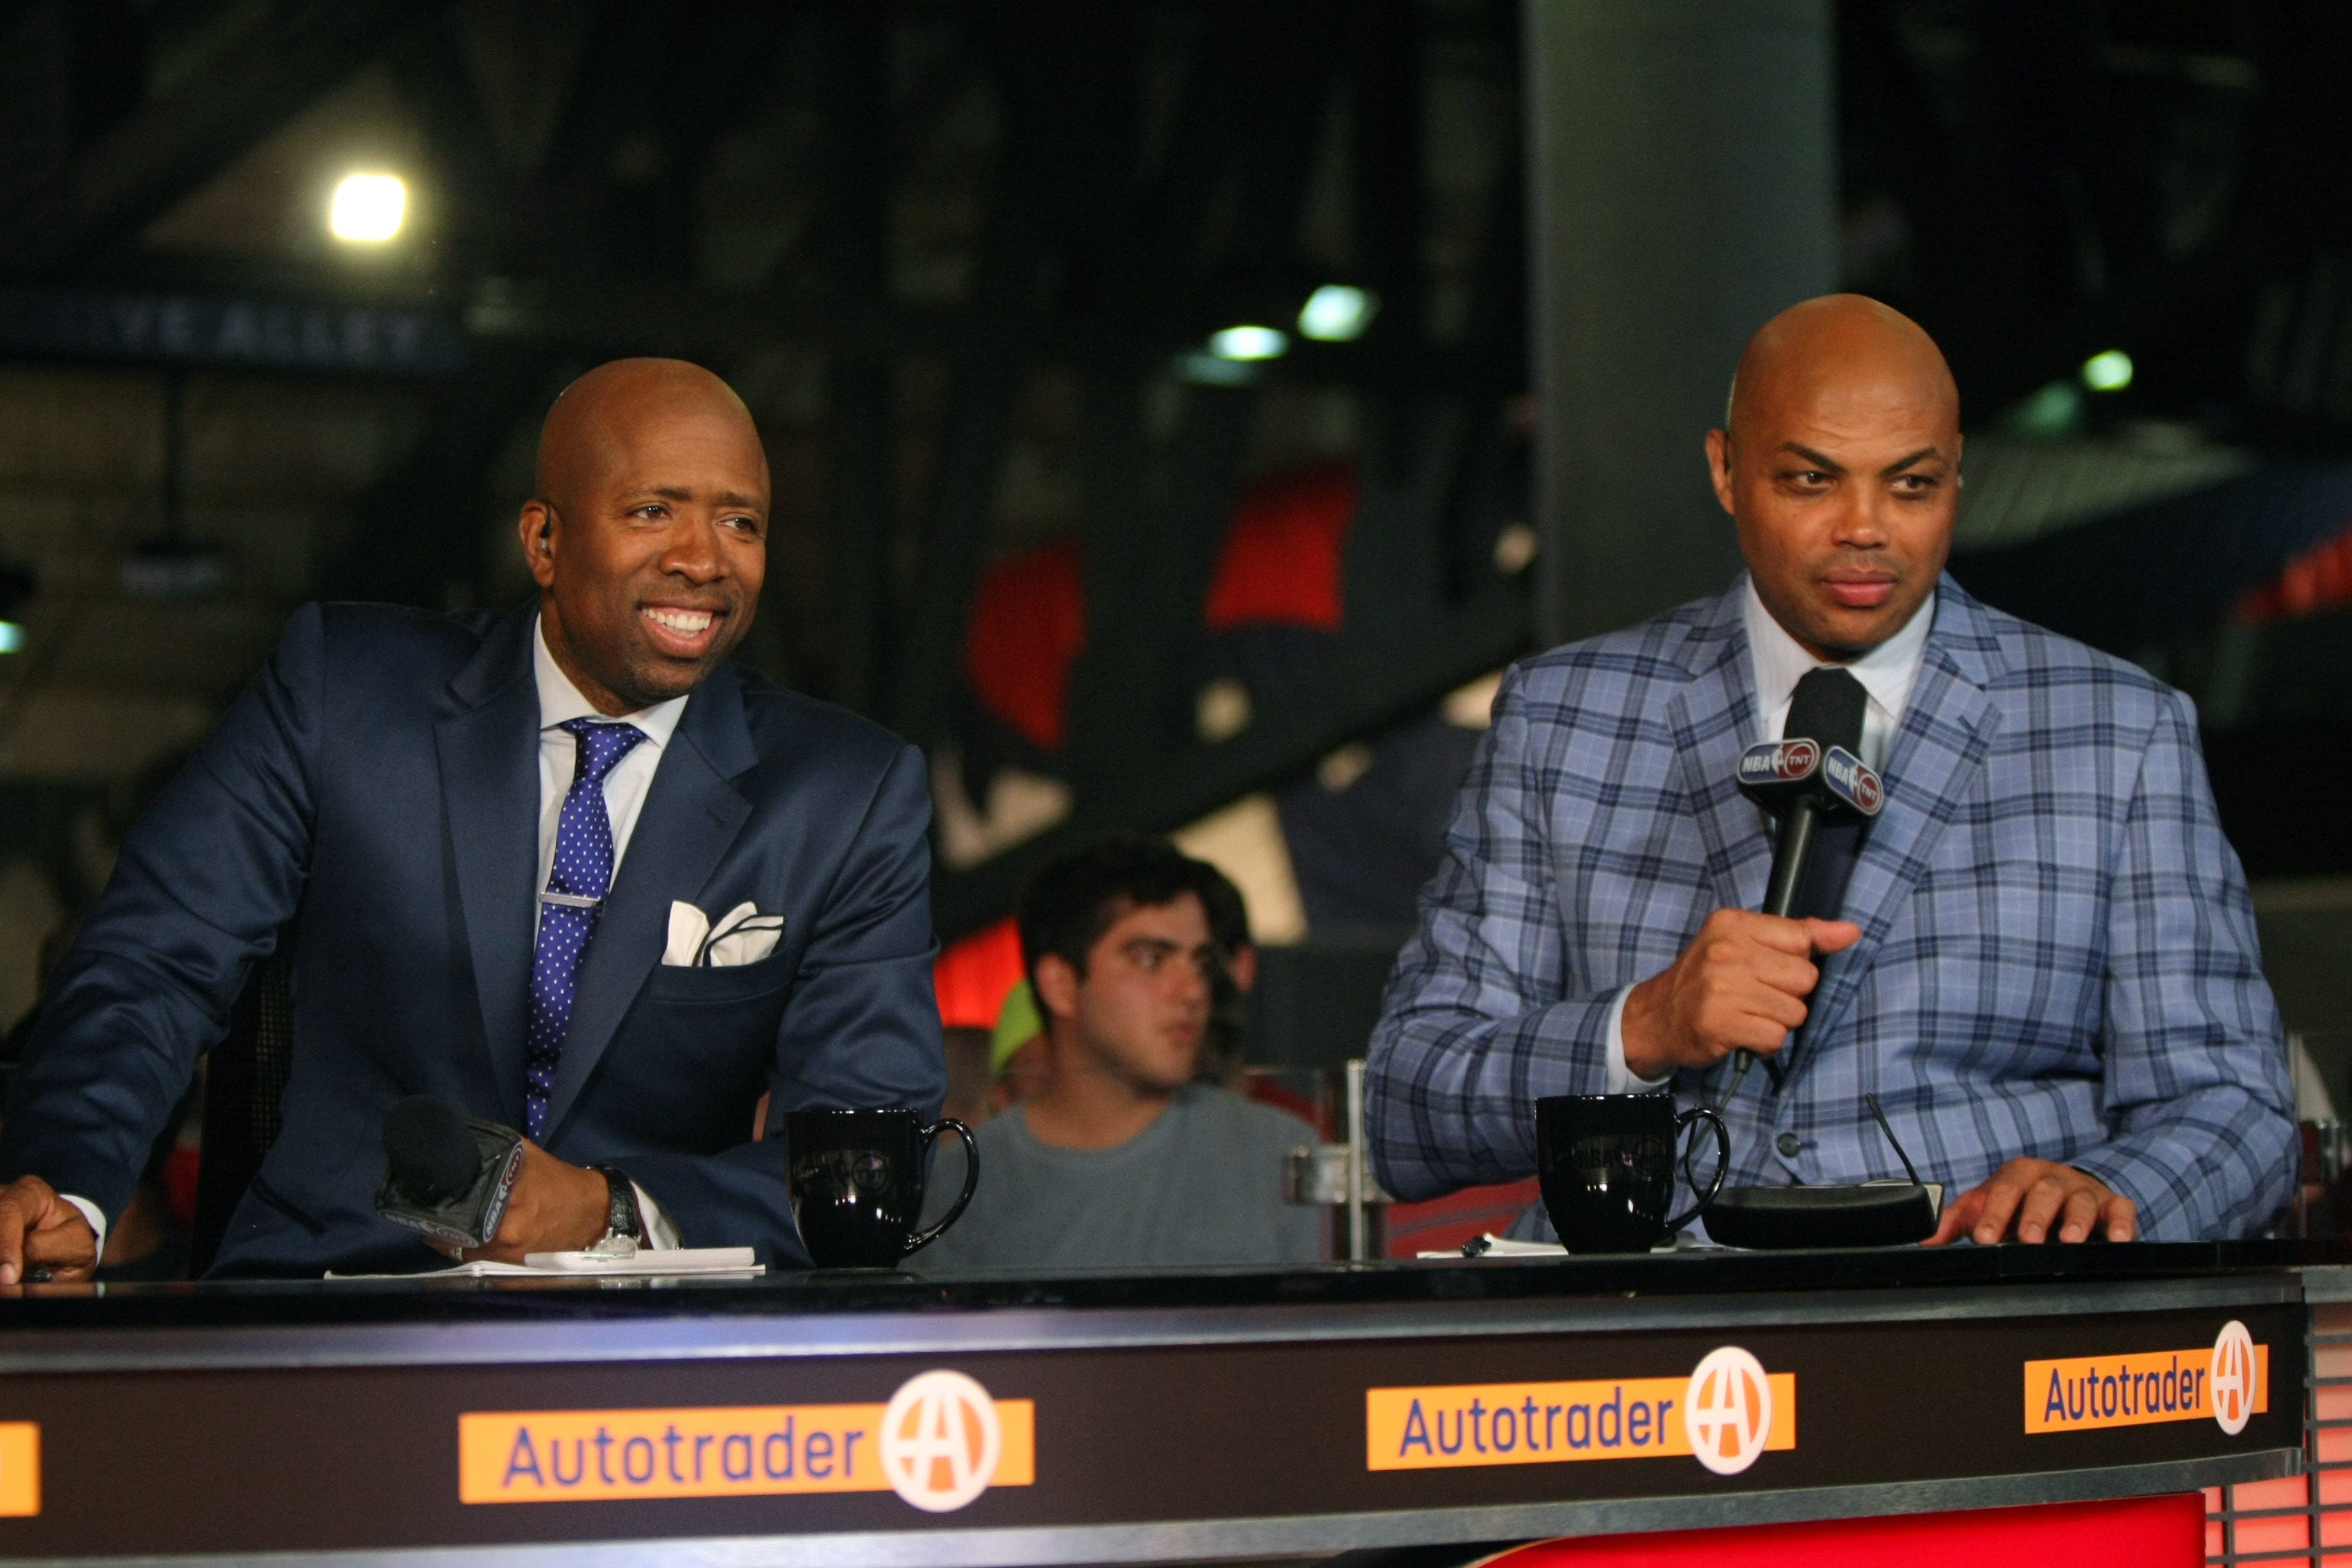 'nba on tnt' analyst kenny smith doubles down on steph vs. sabrina comments